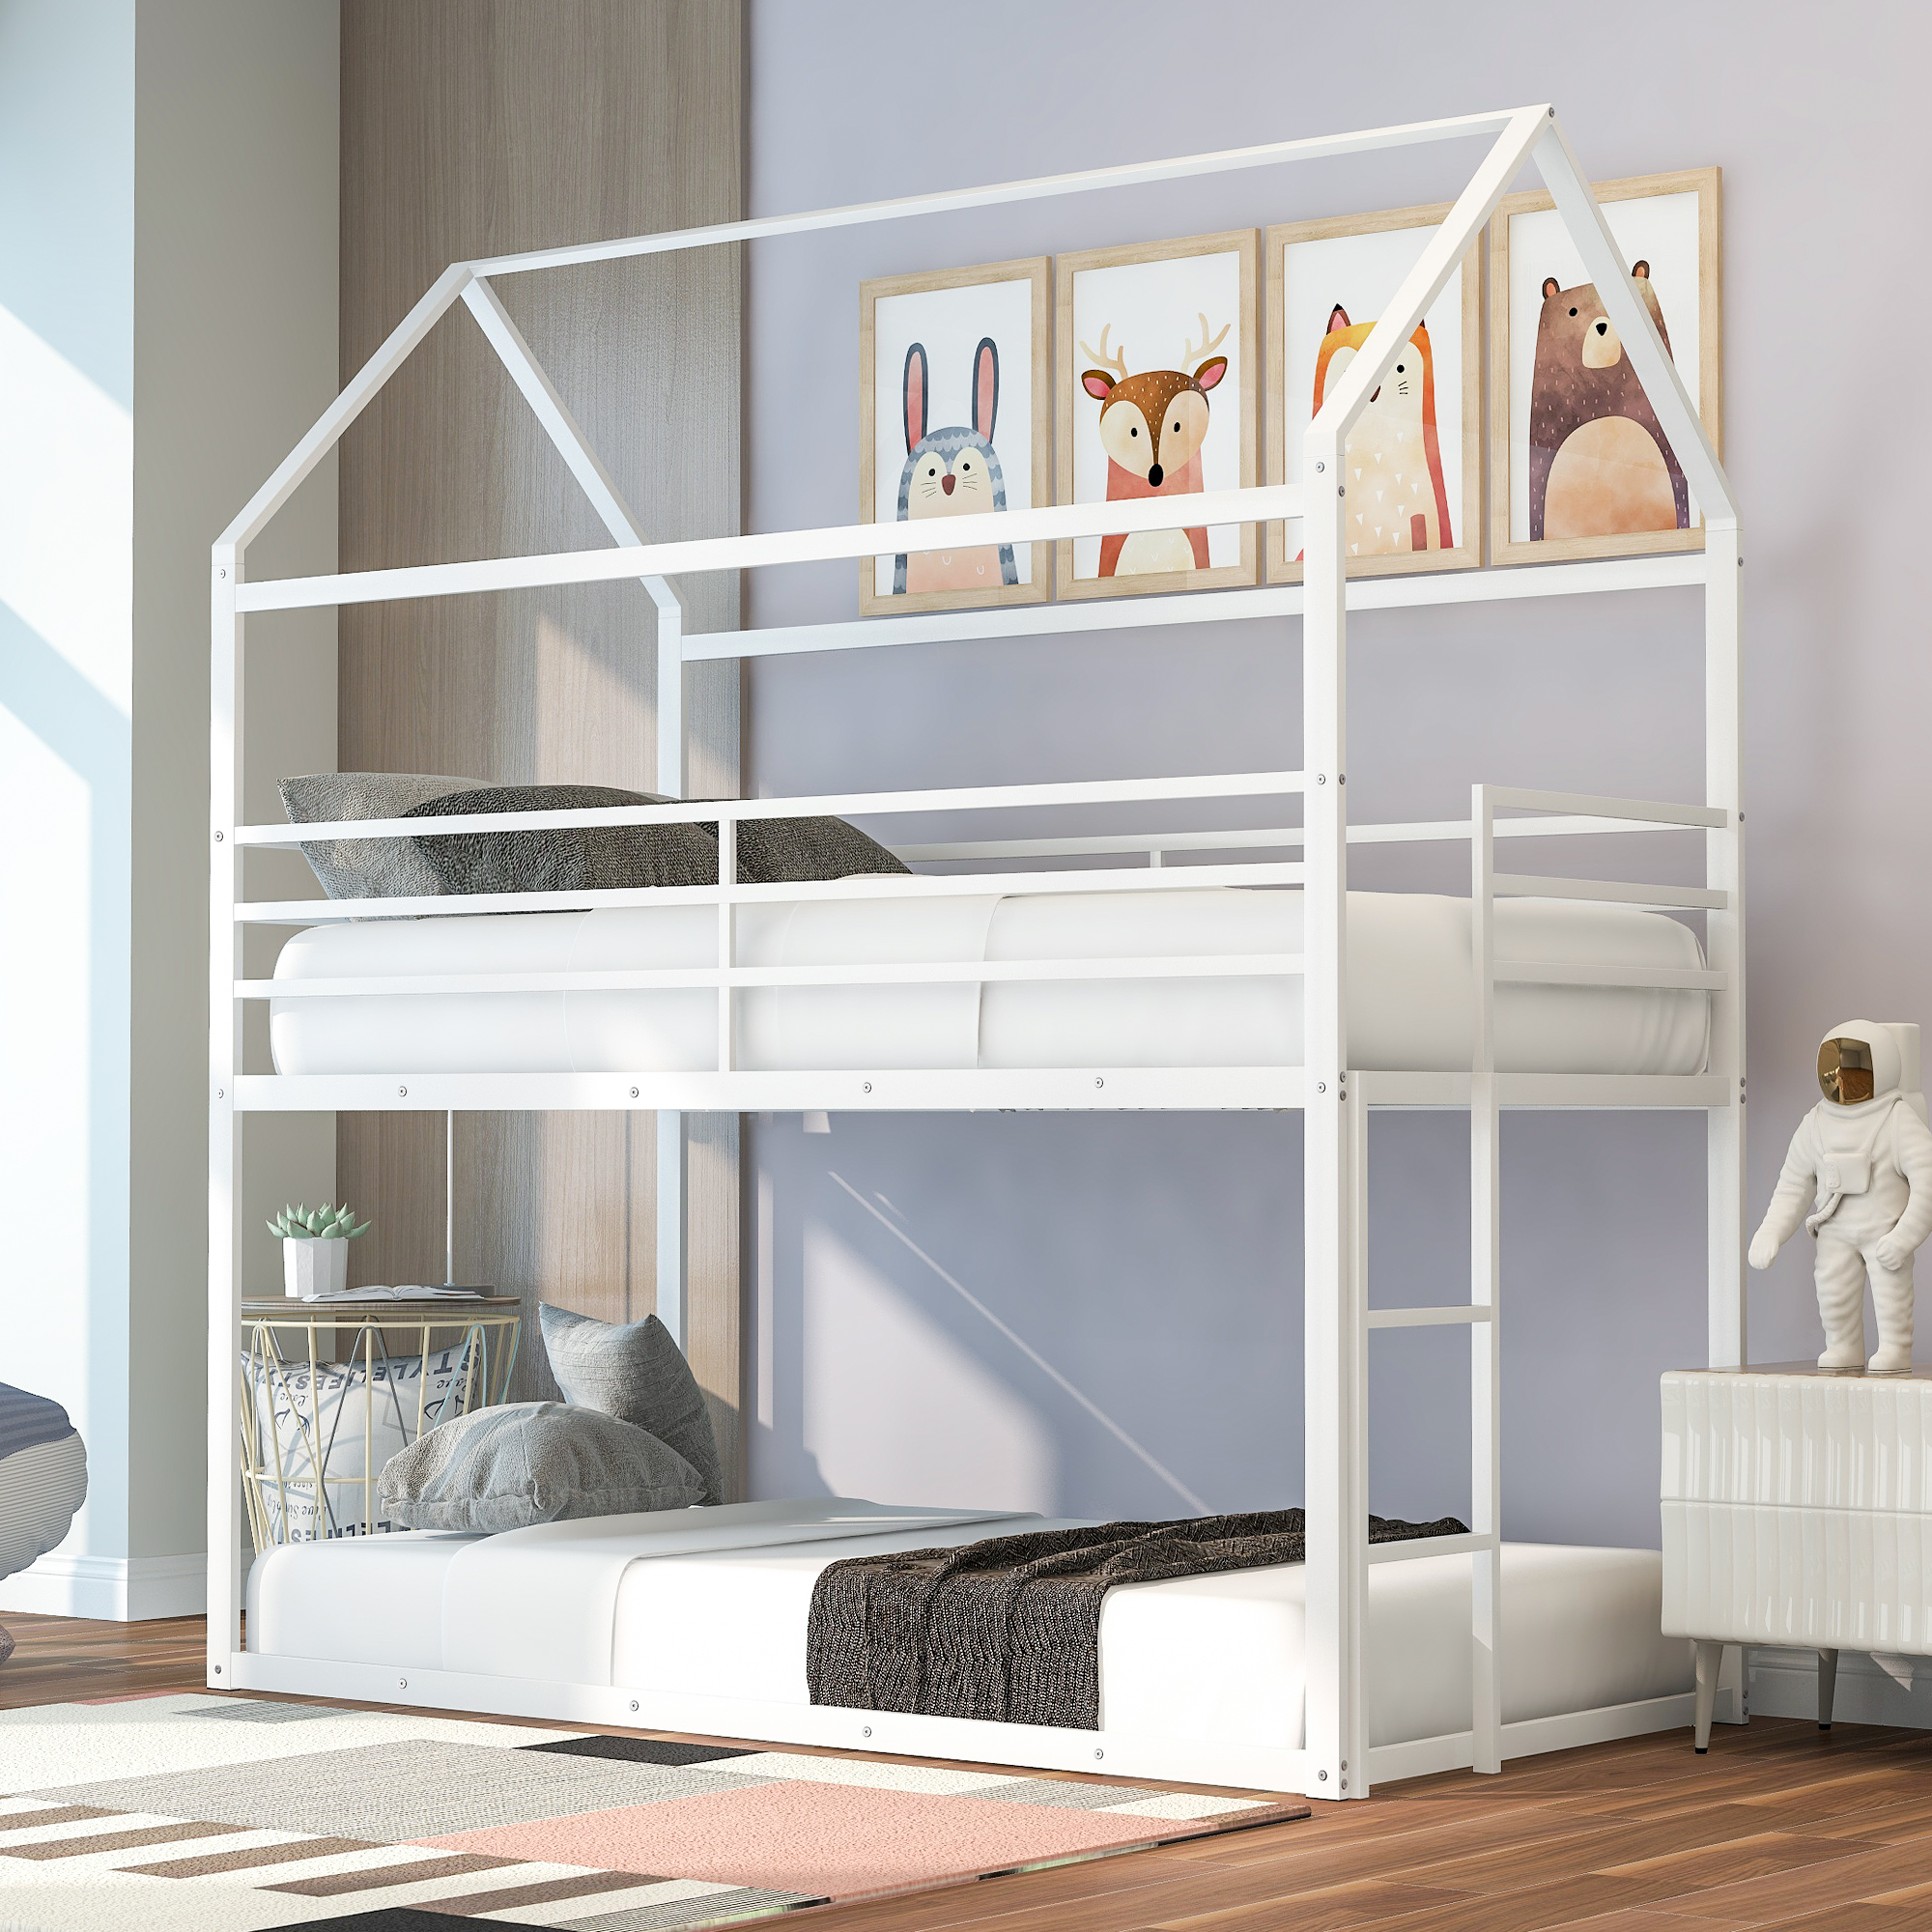 Bunk Beds for Kids Twin over Twin,House Bunk Bed Metal Bed Frame Built-in Ladder White